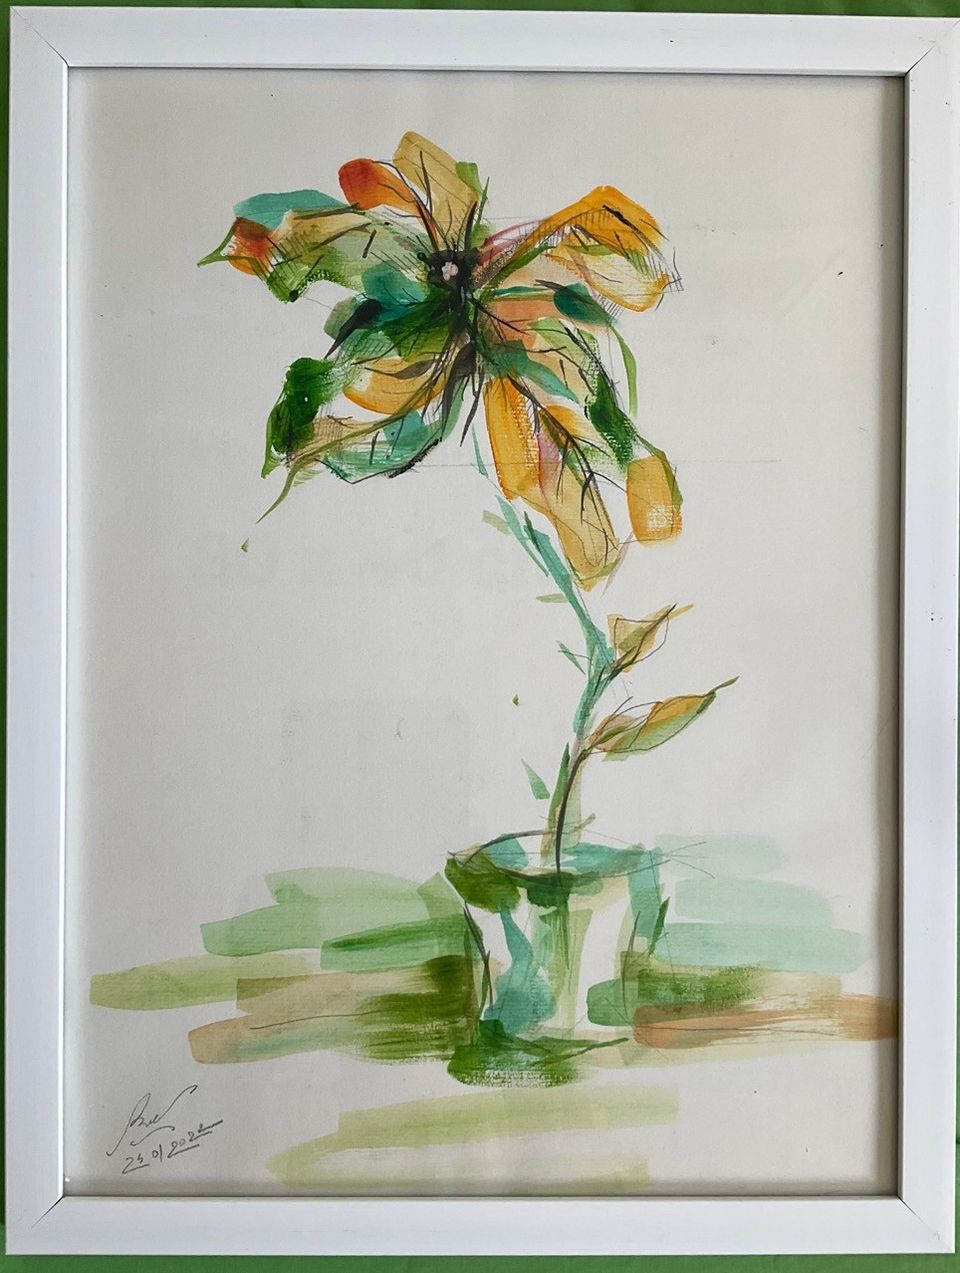 Banana plant | Sketch with watercolor